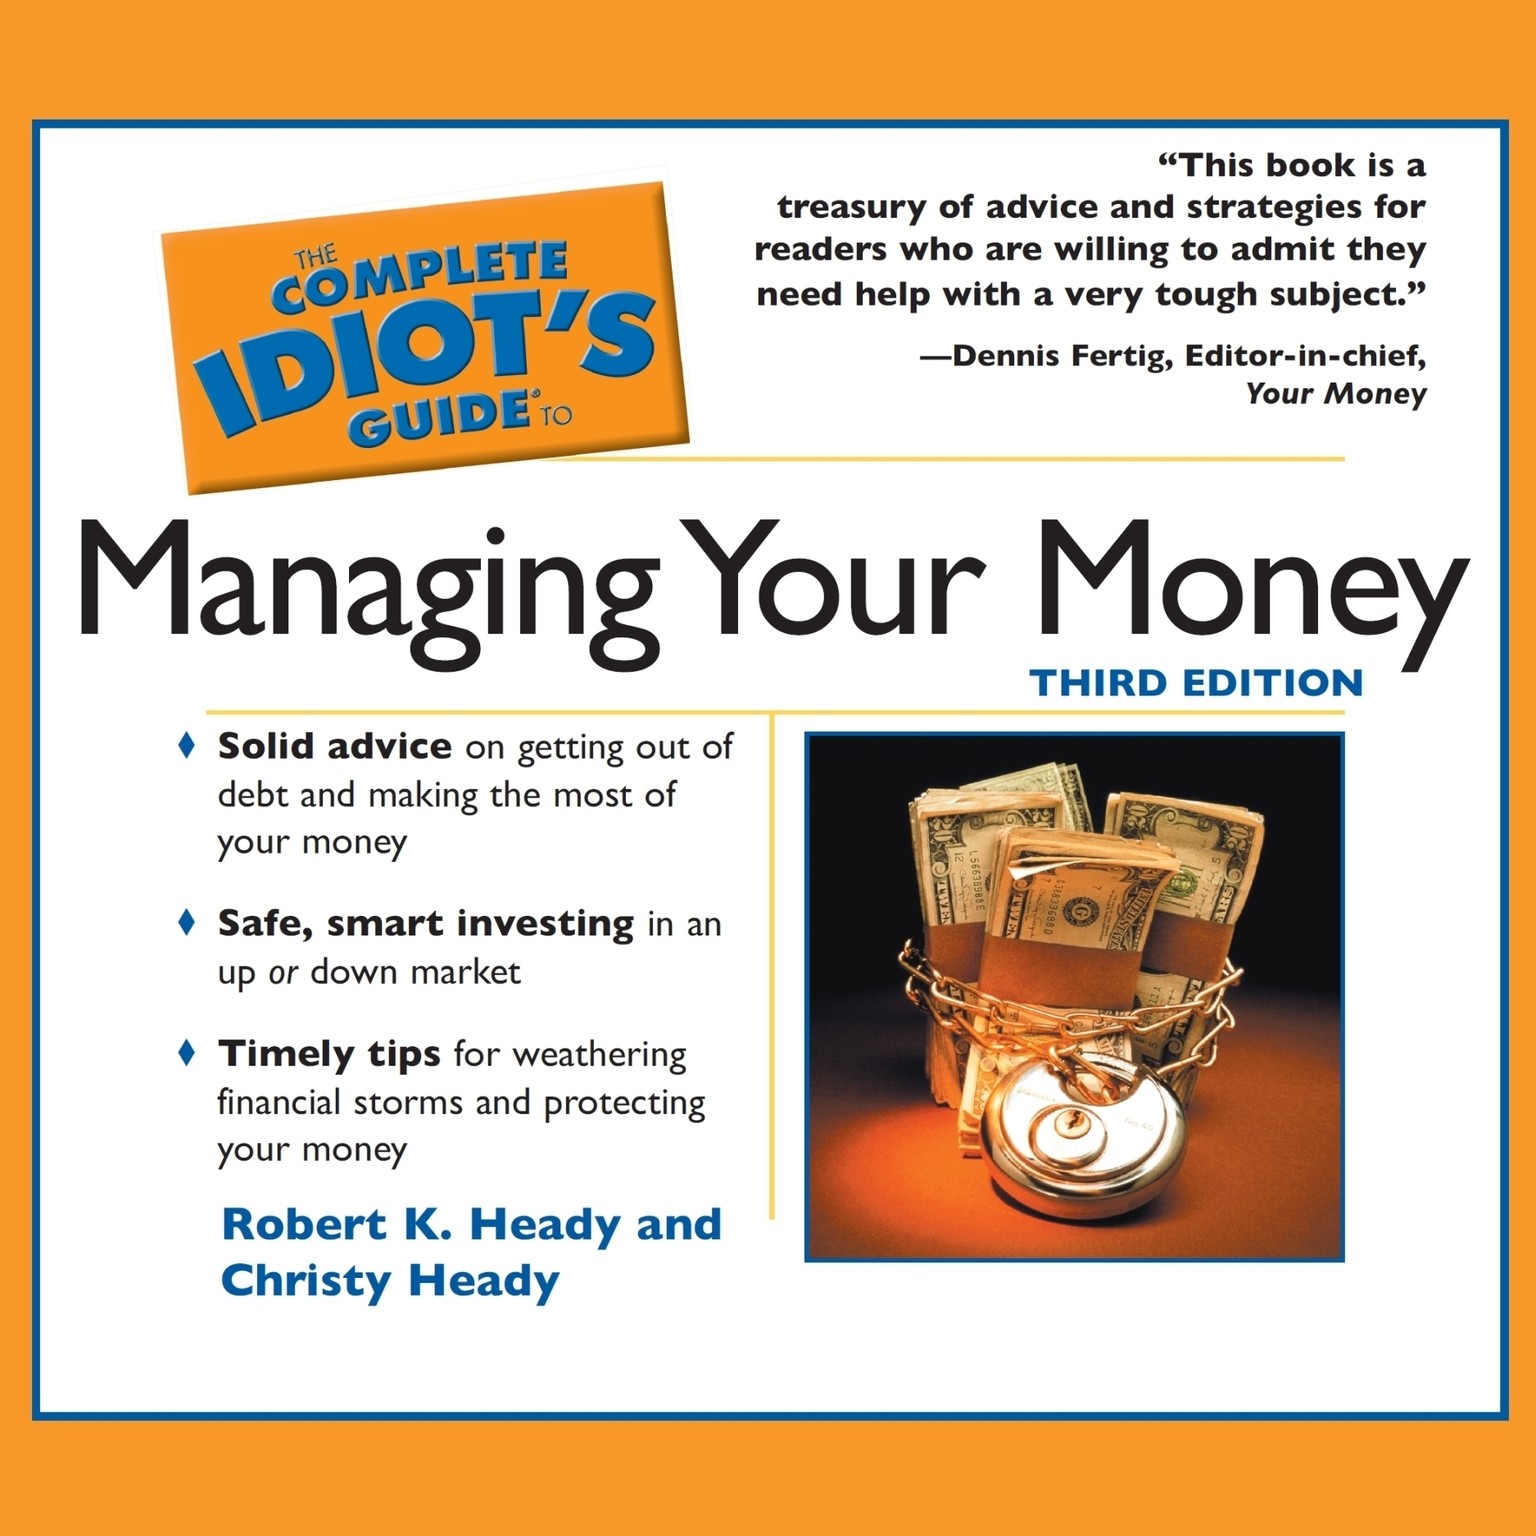 The Complete Idiot’s Guide to Managing Your Money (Abridged) Audiobook, by Robert K. Heady